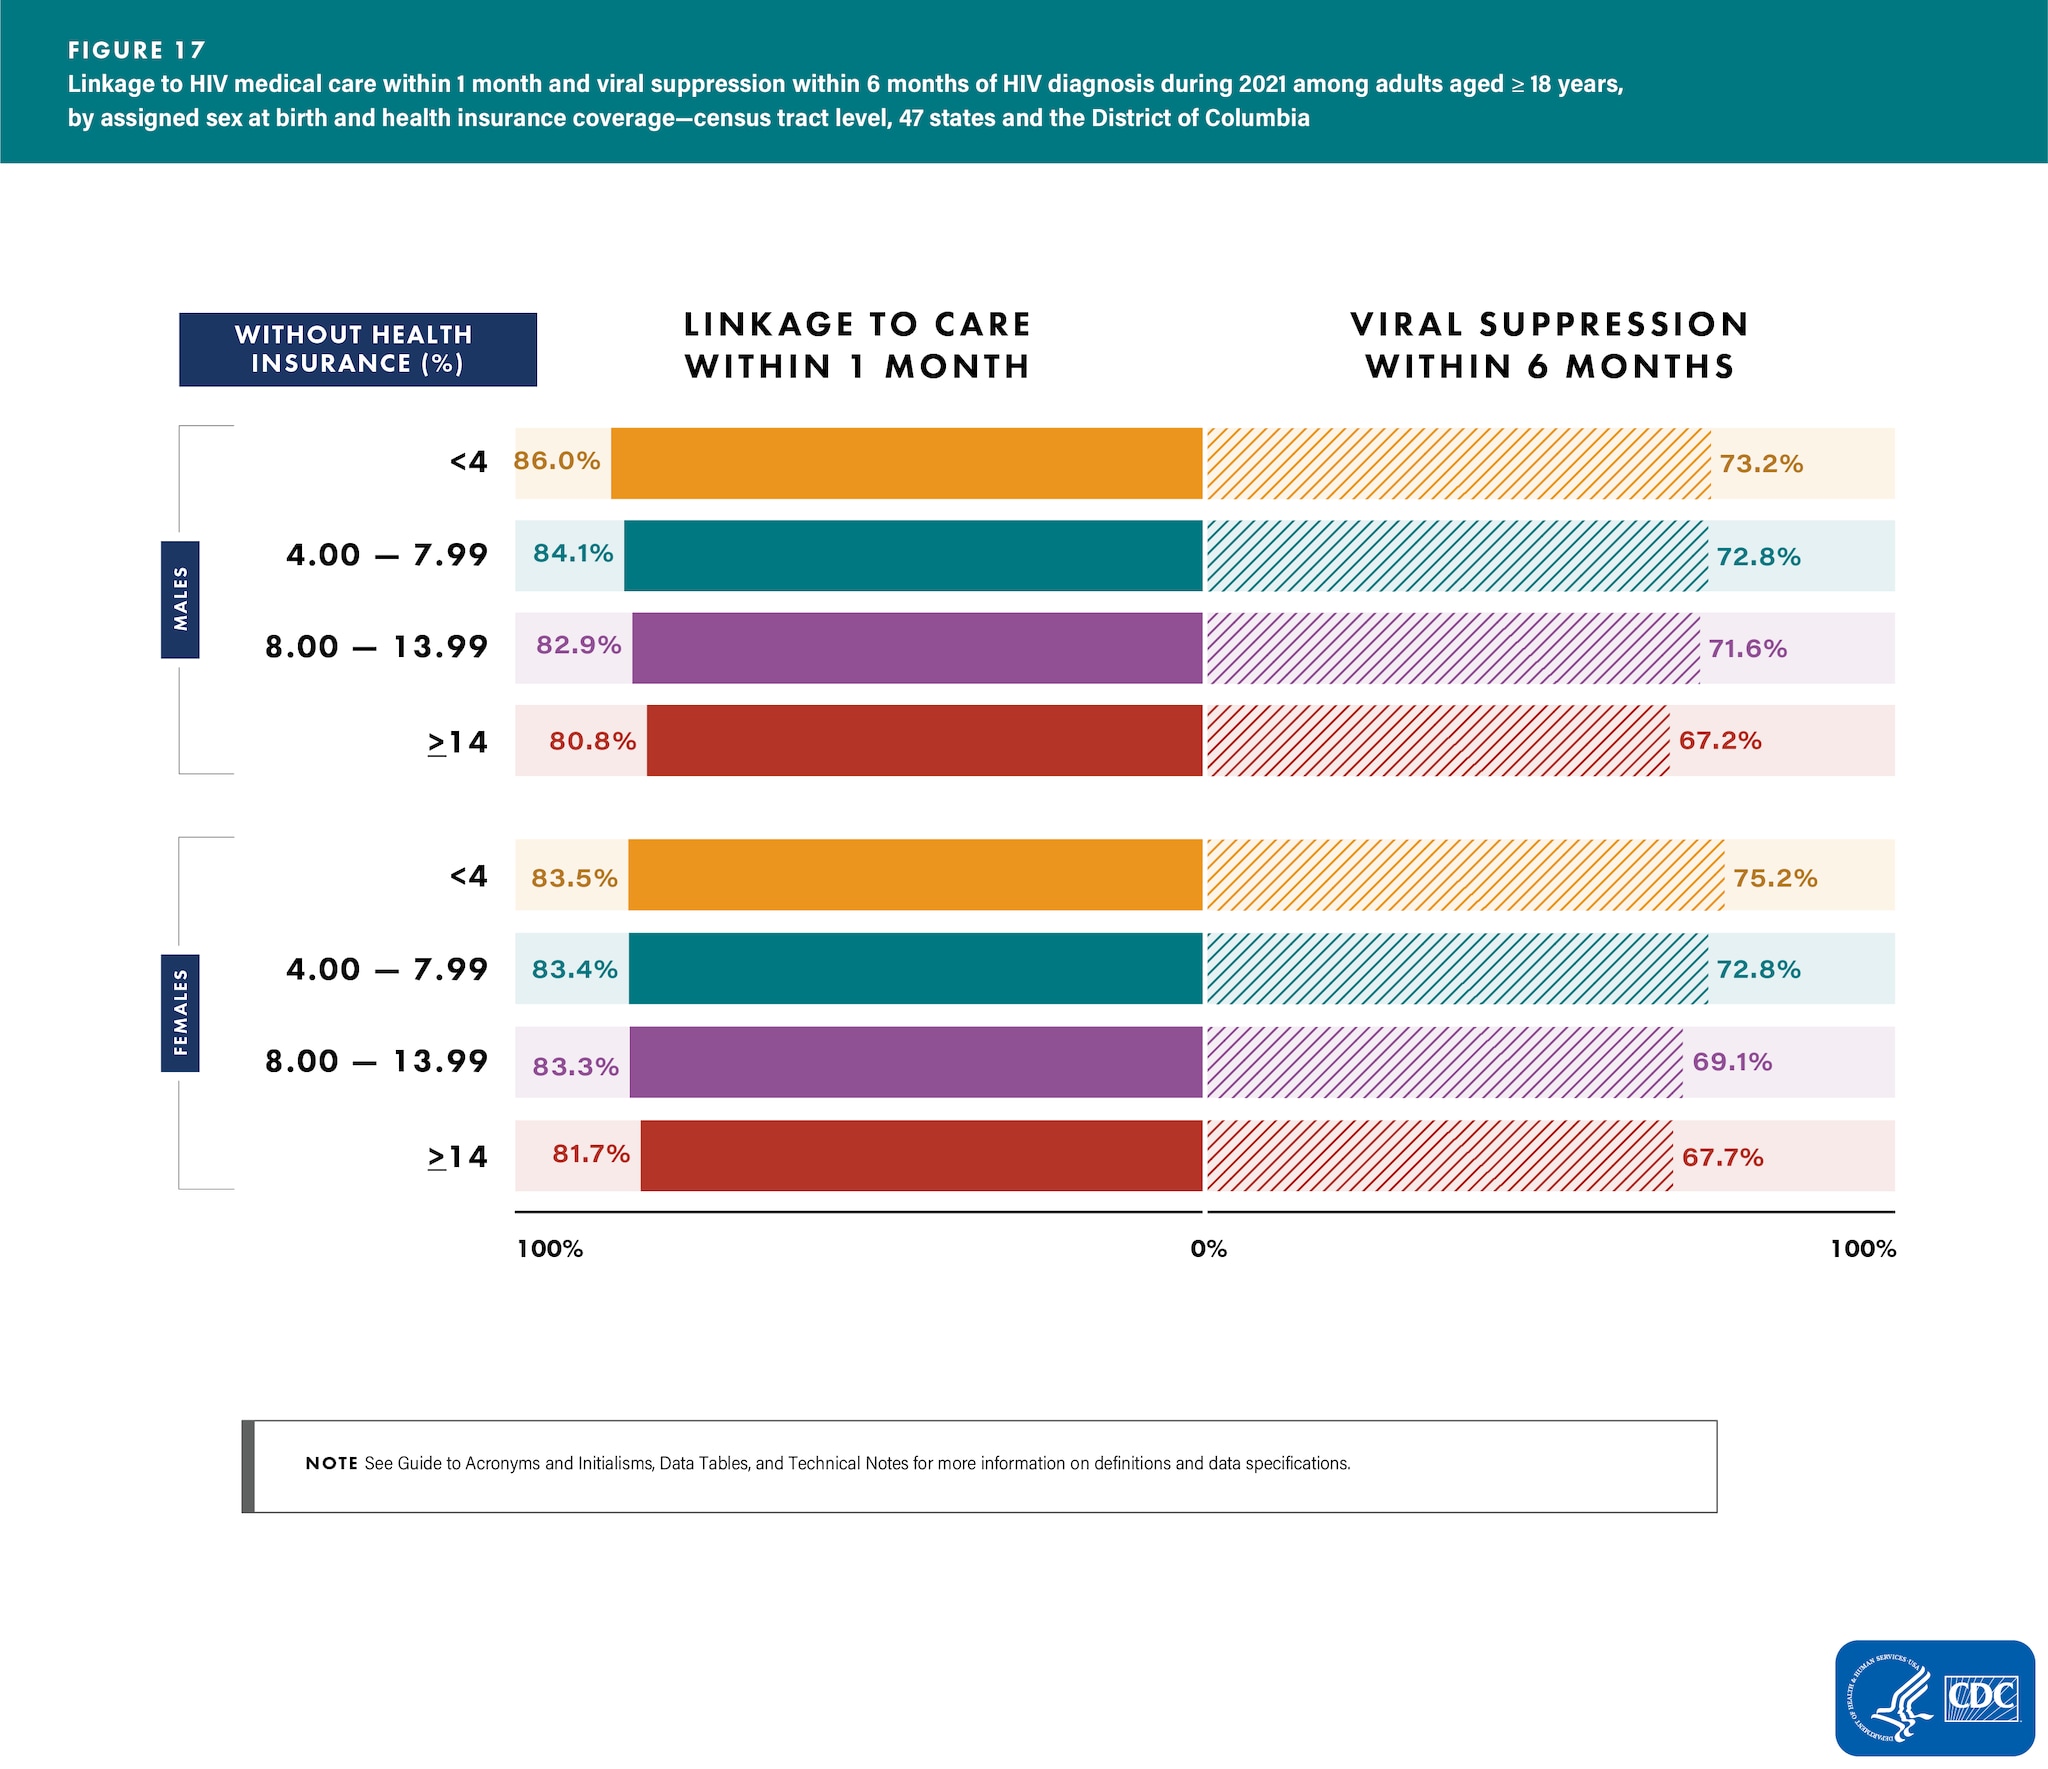 In 2021, adults who lived in census tracts with the lowest health insurance or health coverage plan (hereafter referred to as health insurance coverage) (where 14% or more of the residents did not have health insurance coverage) had the lowest percentages of linkage to HIV medical care within 1 month and viral suppression within 6 months of HIV diagnosis among both male and female assigned sex at birth.